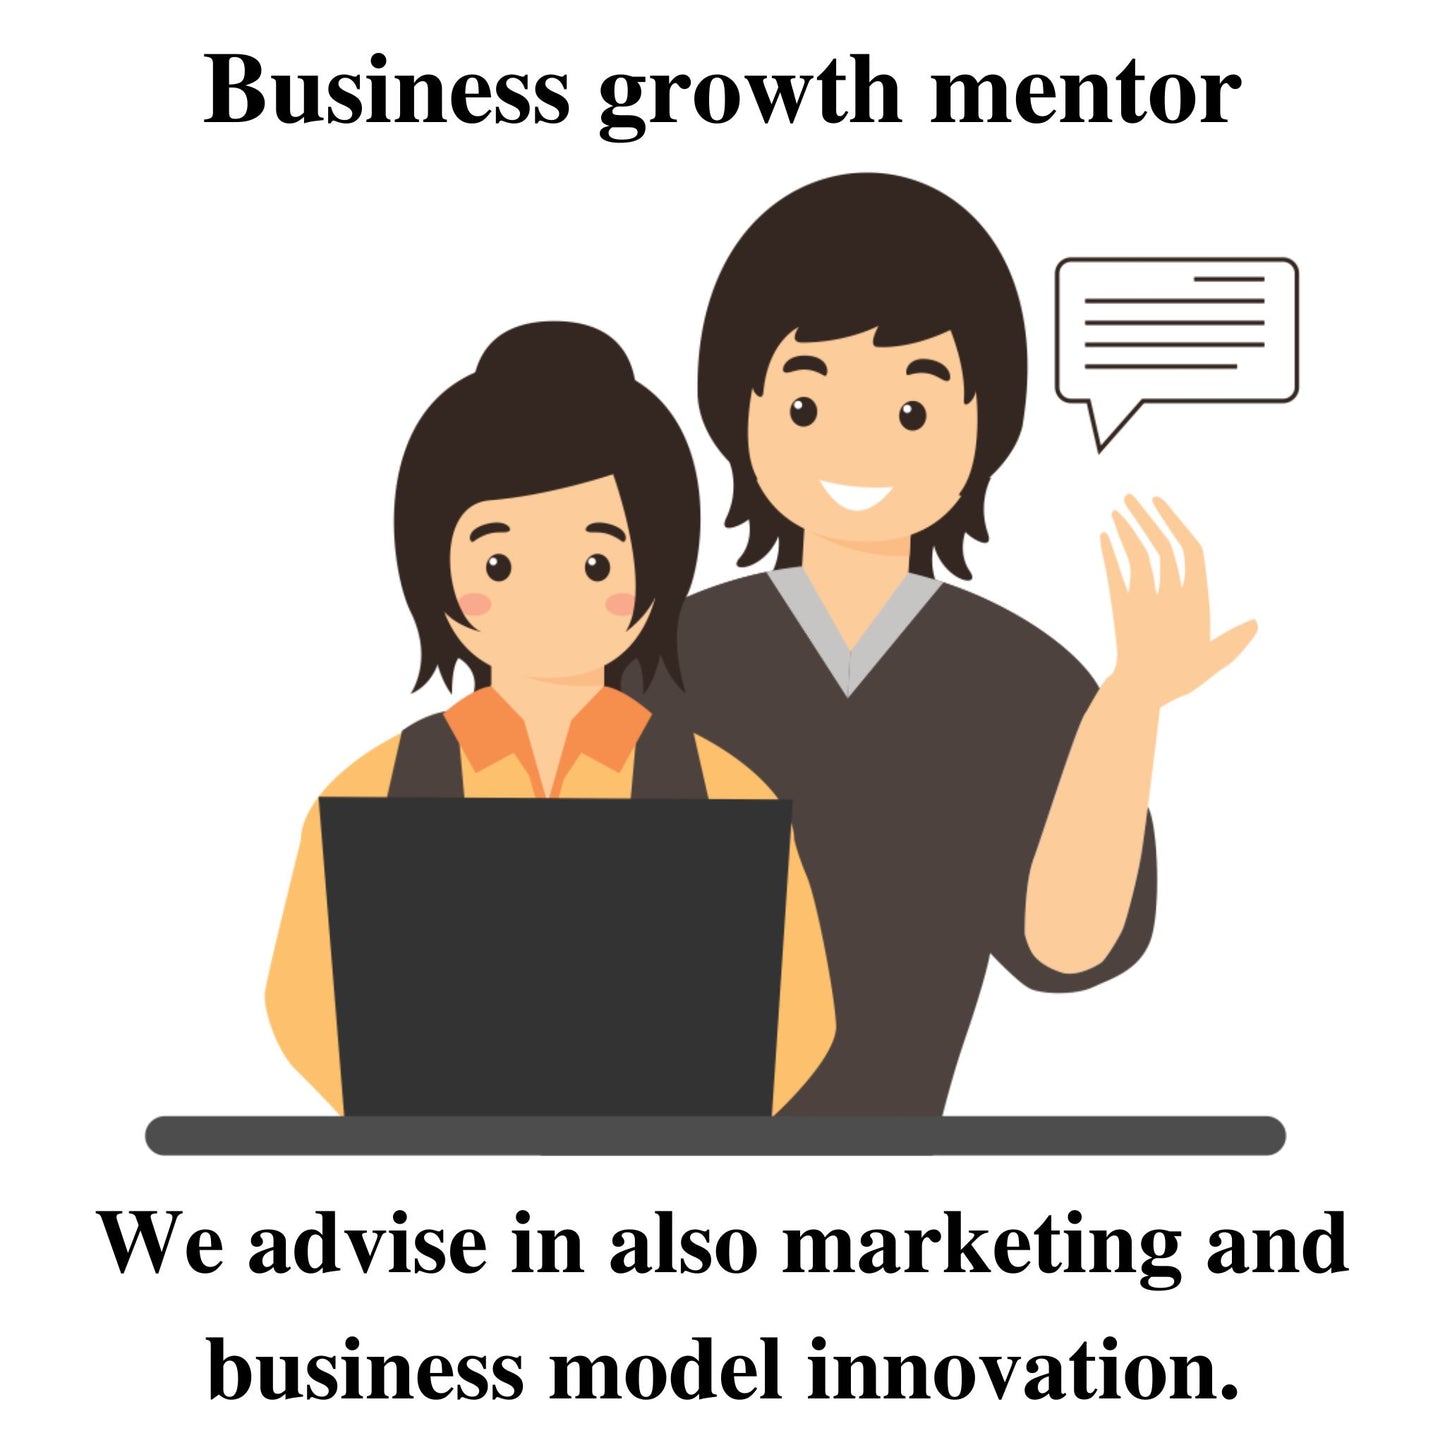 We advise in also marketing and business model innovation.